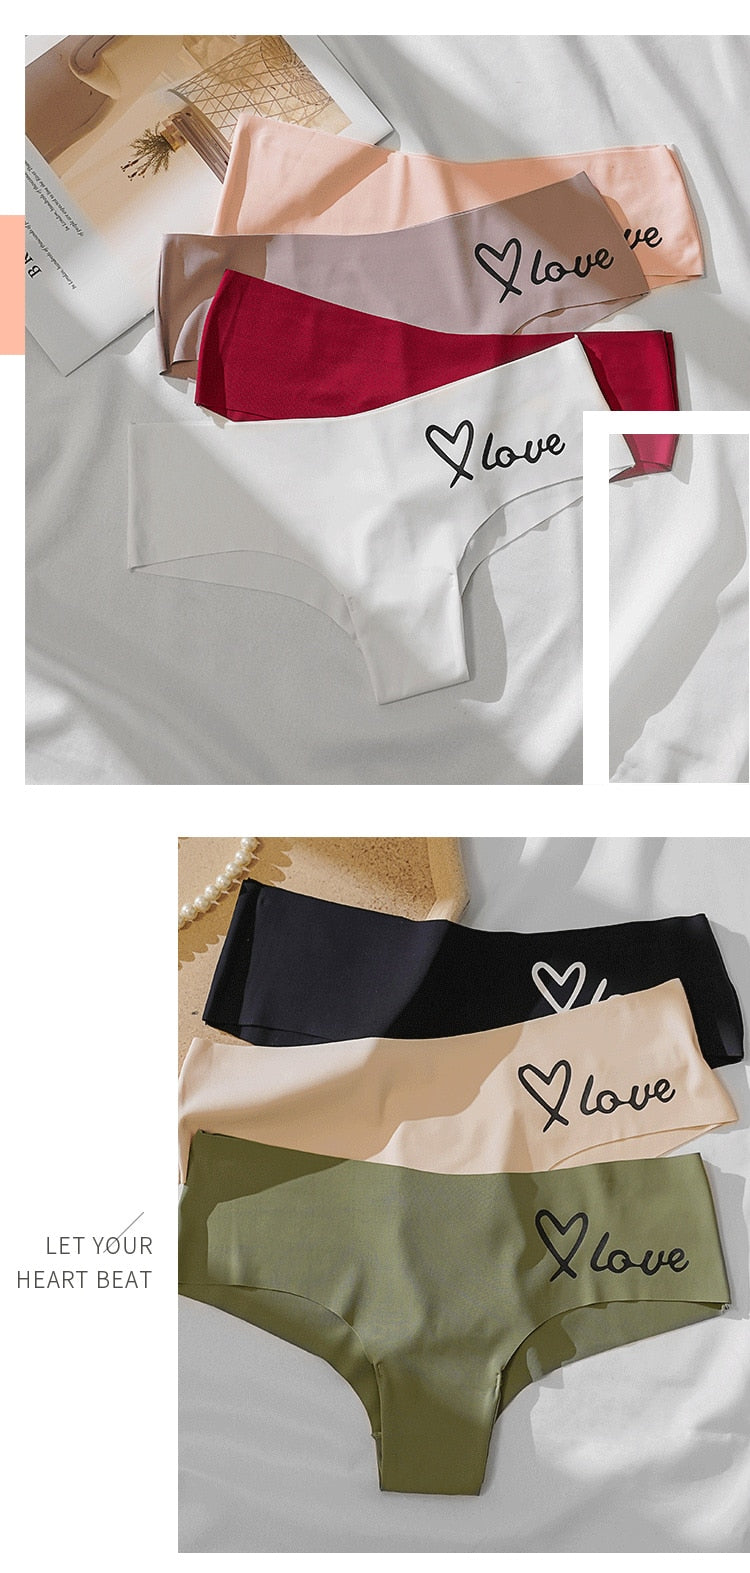 Women's Seamless Panties Underwear Comfort Heart Intimates Low-Rise G String Briefs 7 Colours Lingerie The Clothing Company Sydney